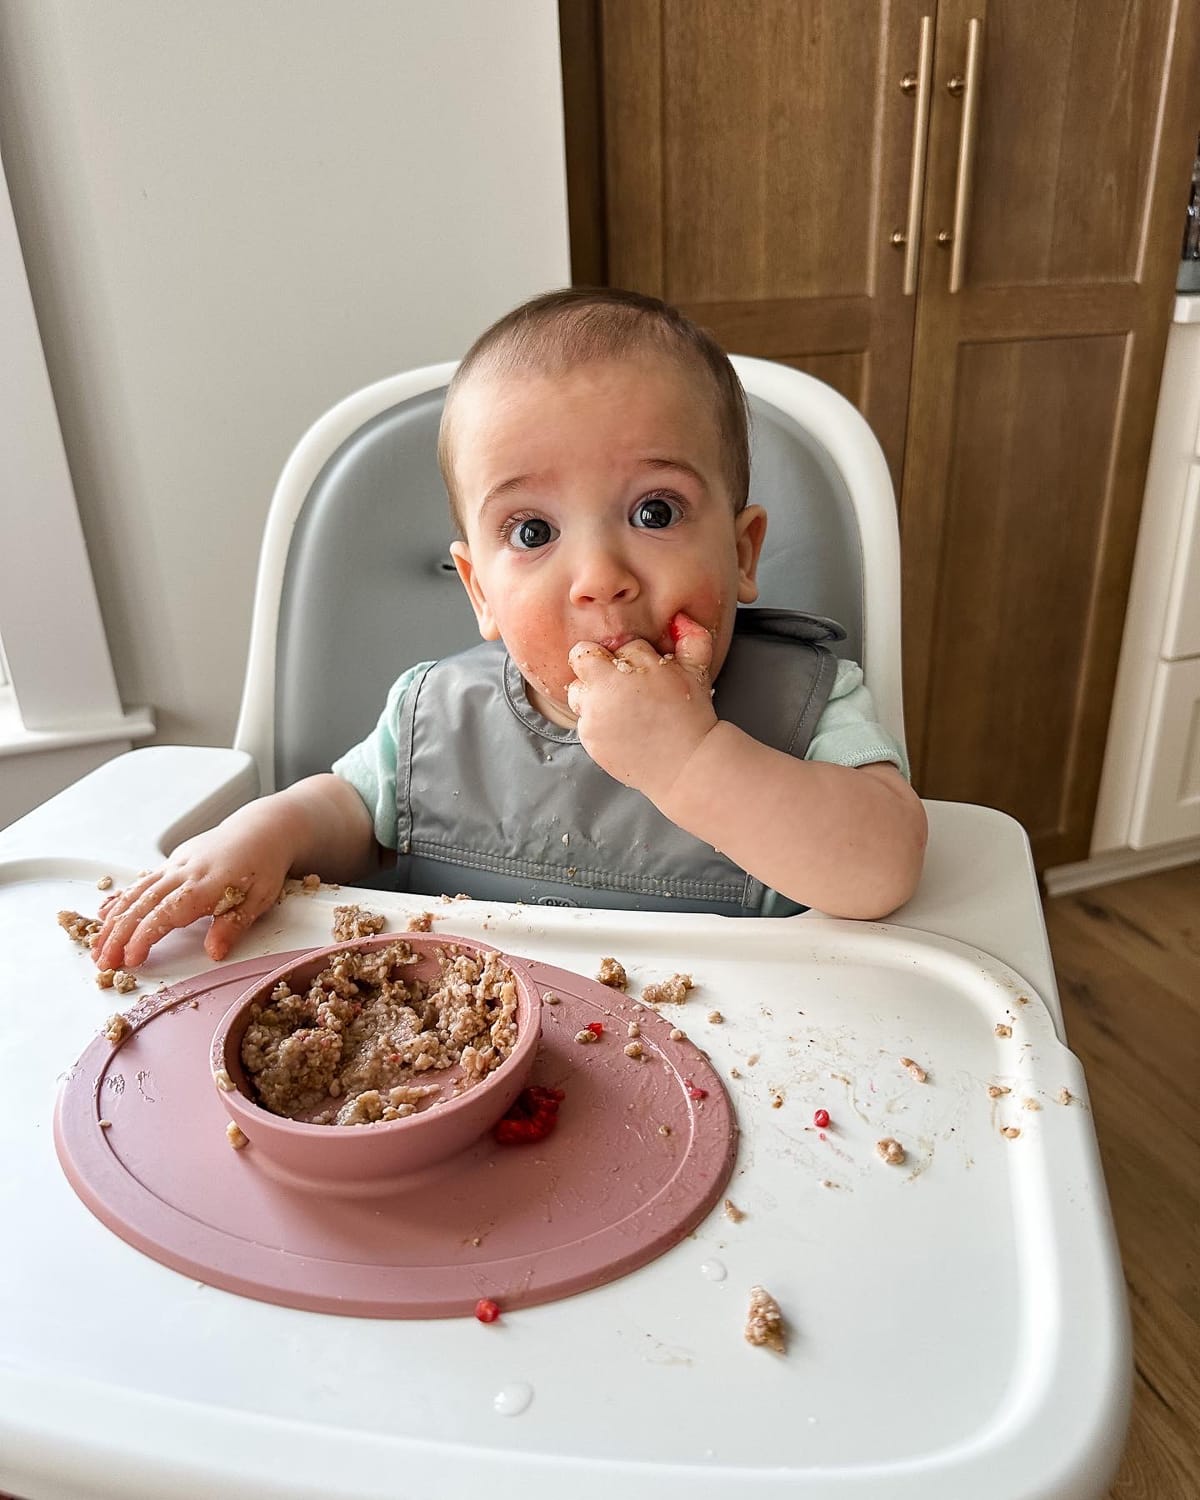 Baby boy eating oatmeal in a high chair with a gray bib and pink bowl.